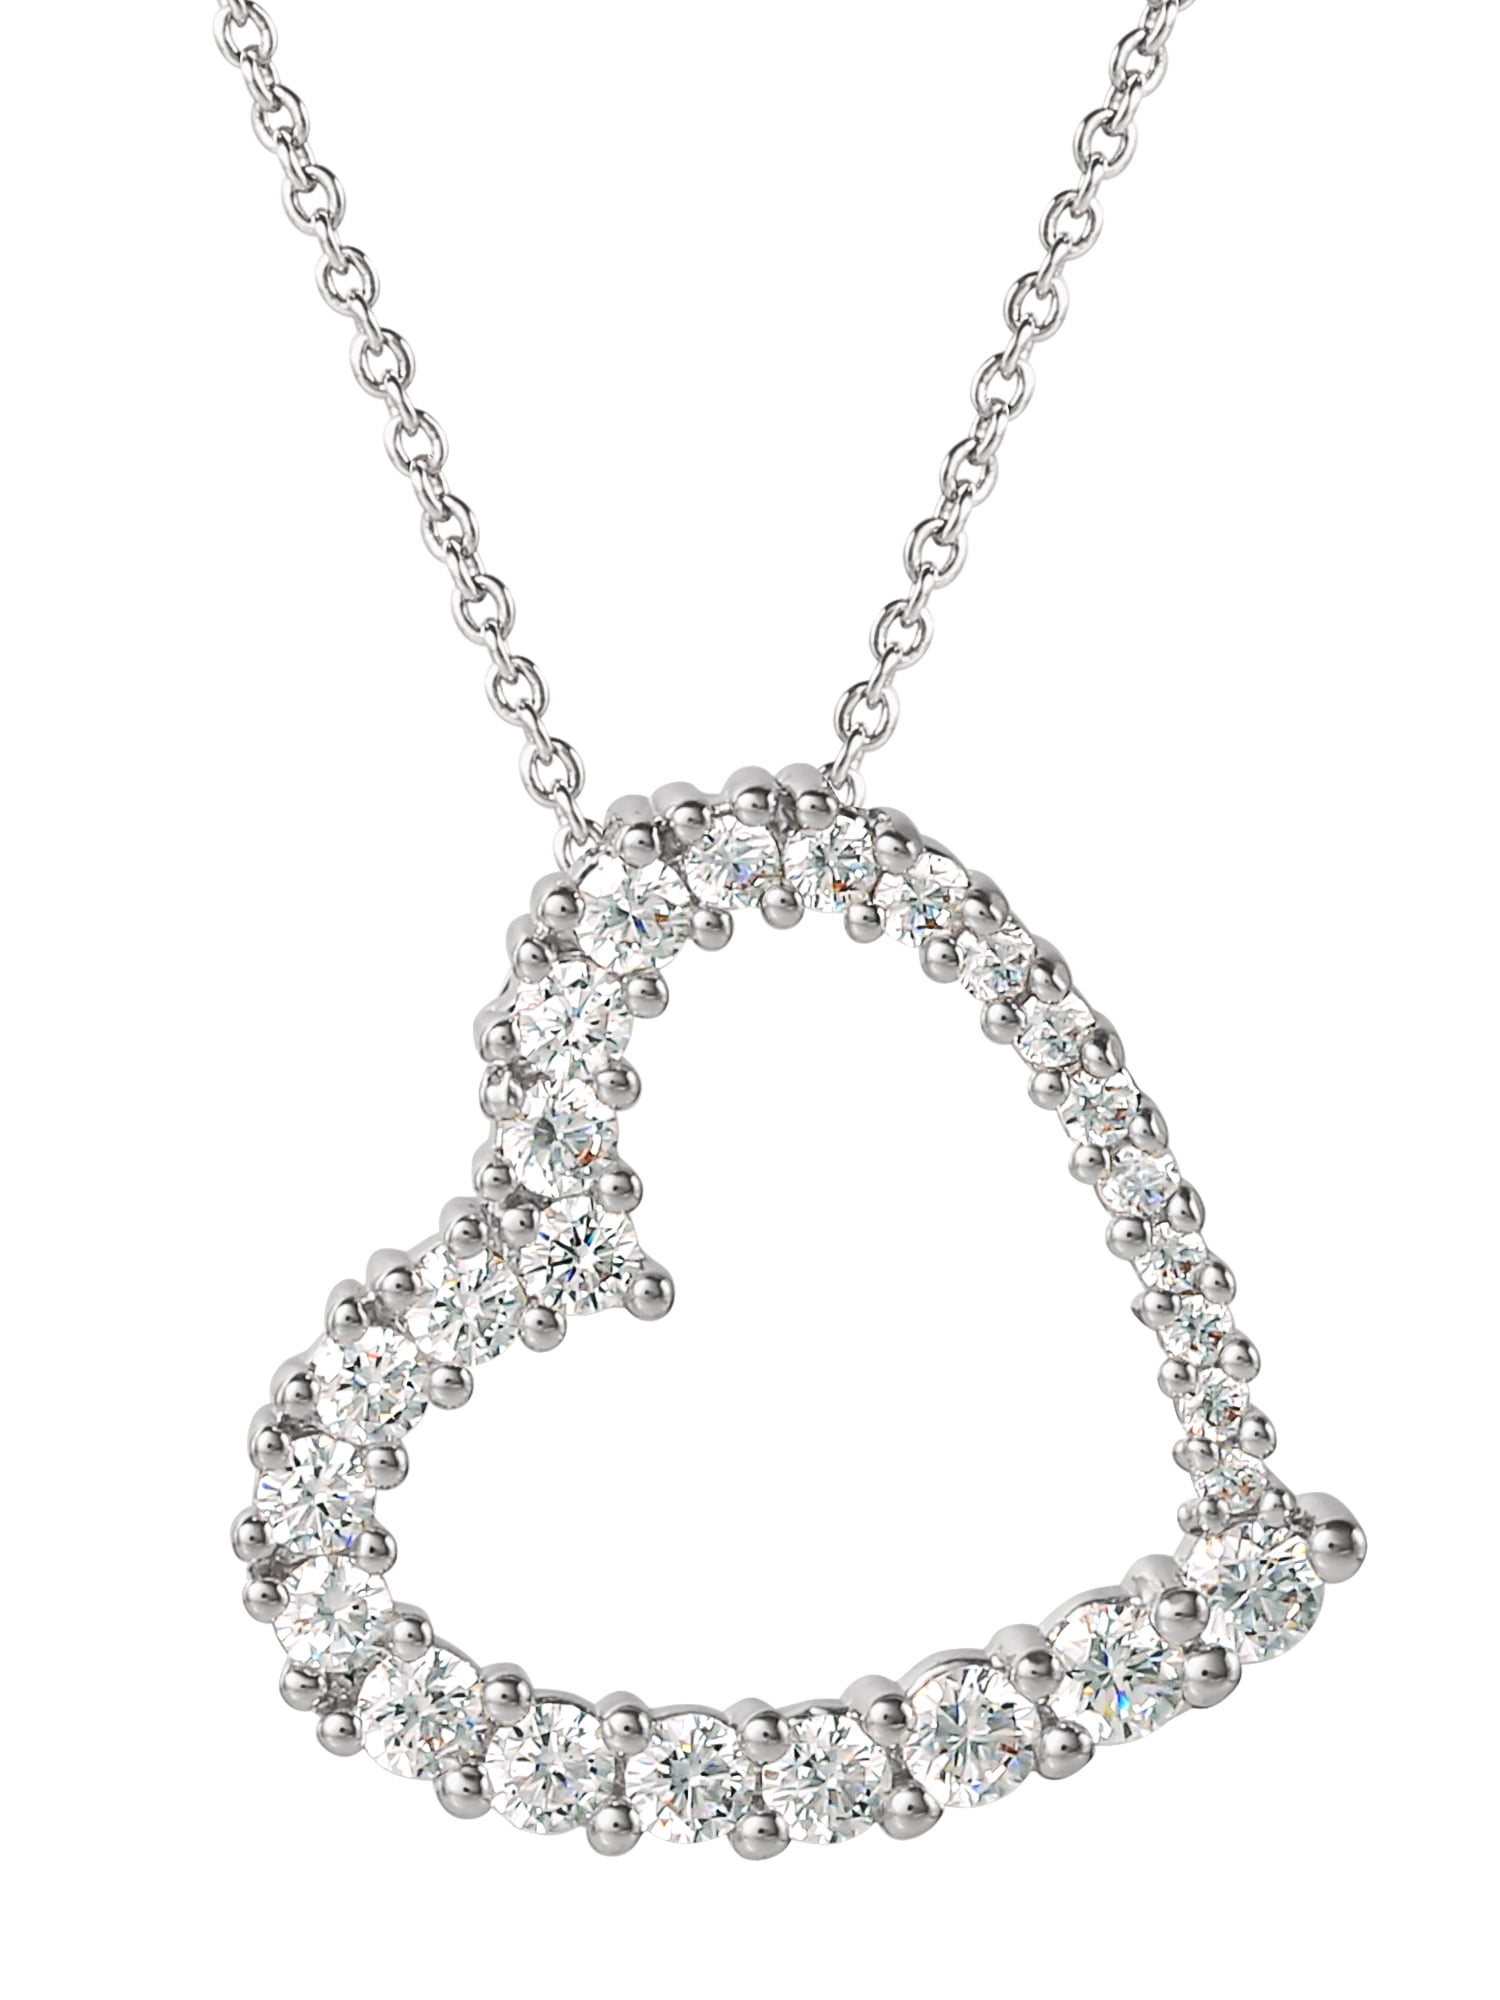 Believe by Brilliance Fine Siver Plated Cubic Zirconia Open Heart Pendant Necklace, 18"